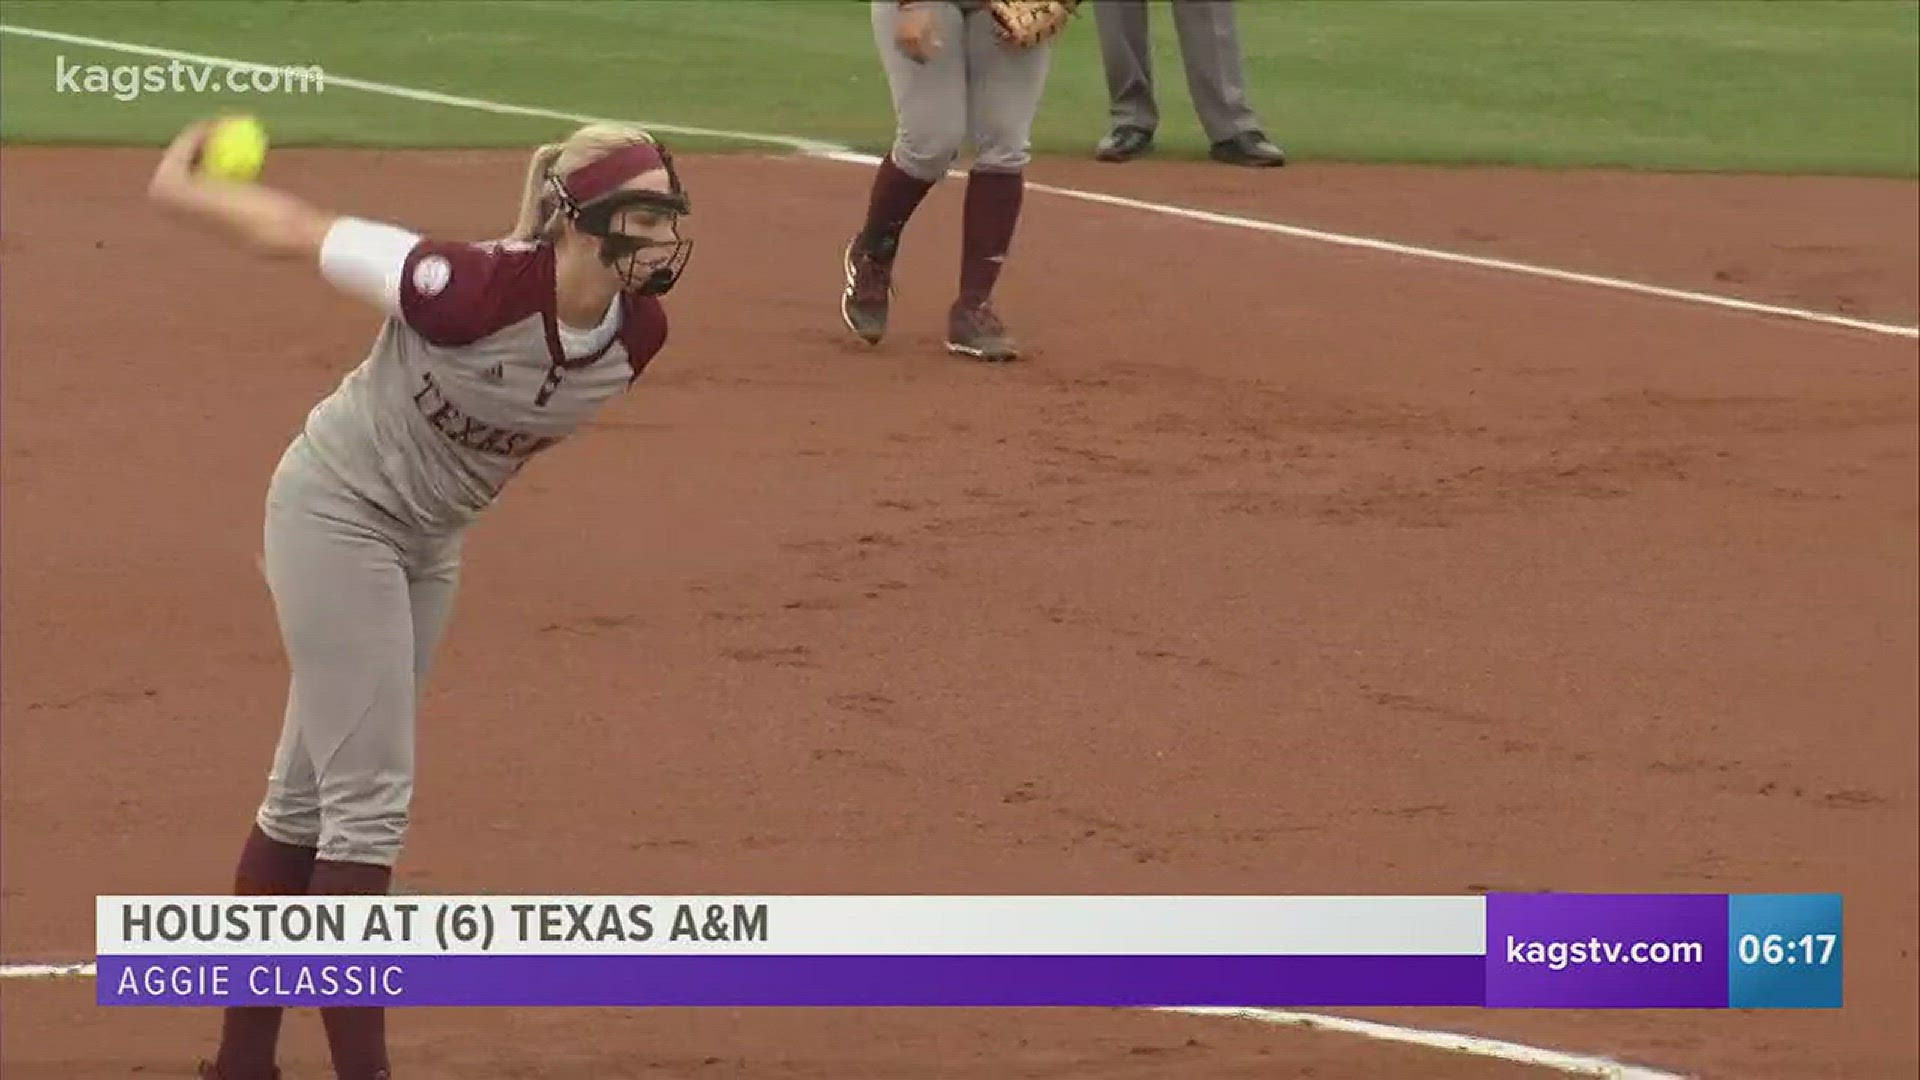 No. 6 Texas A&M defeated Houston 5-4 and Boston College 3-1 on opening day.